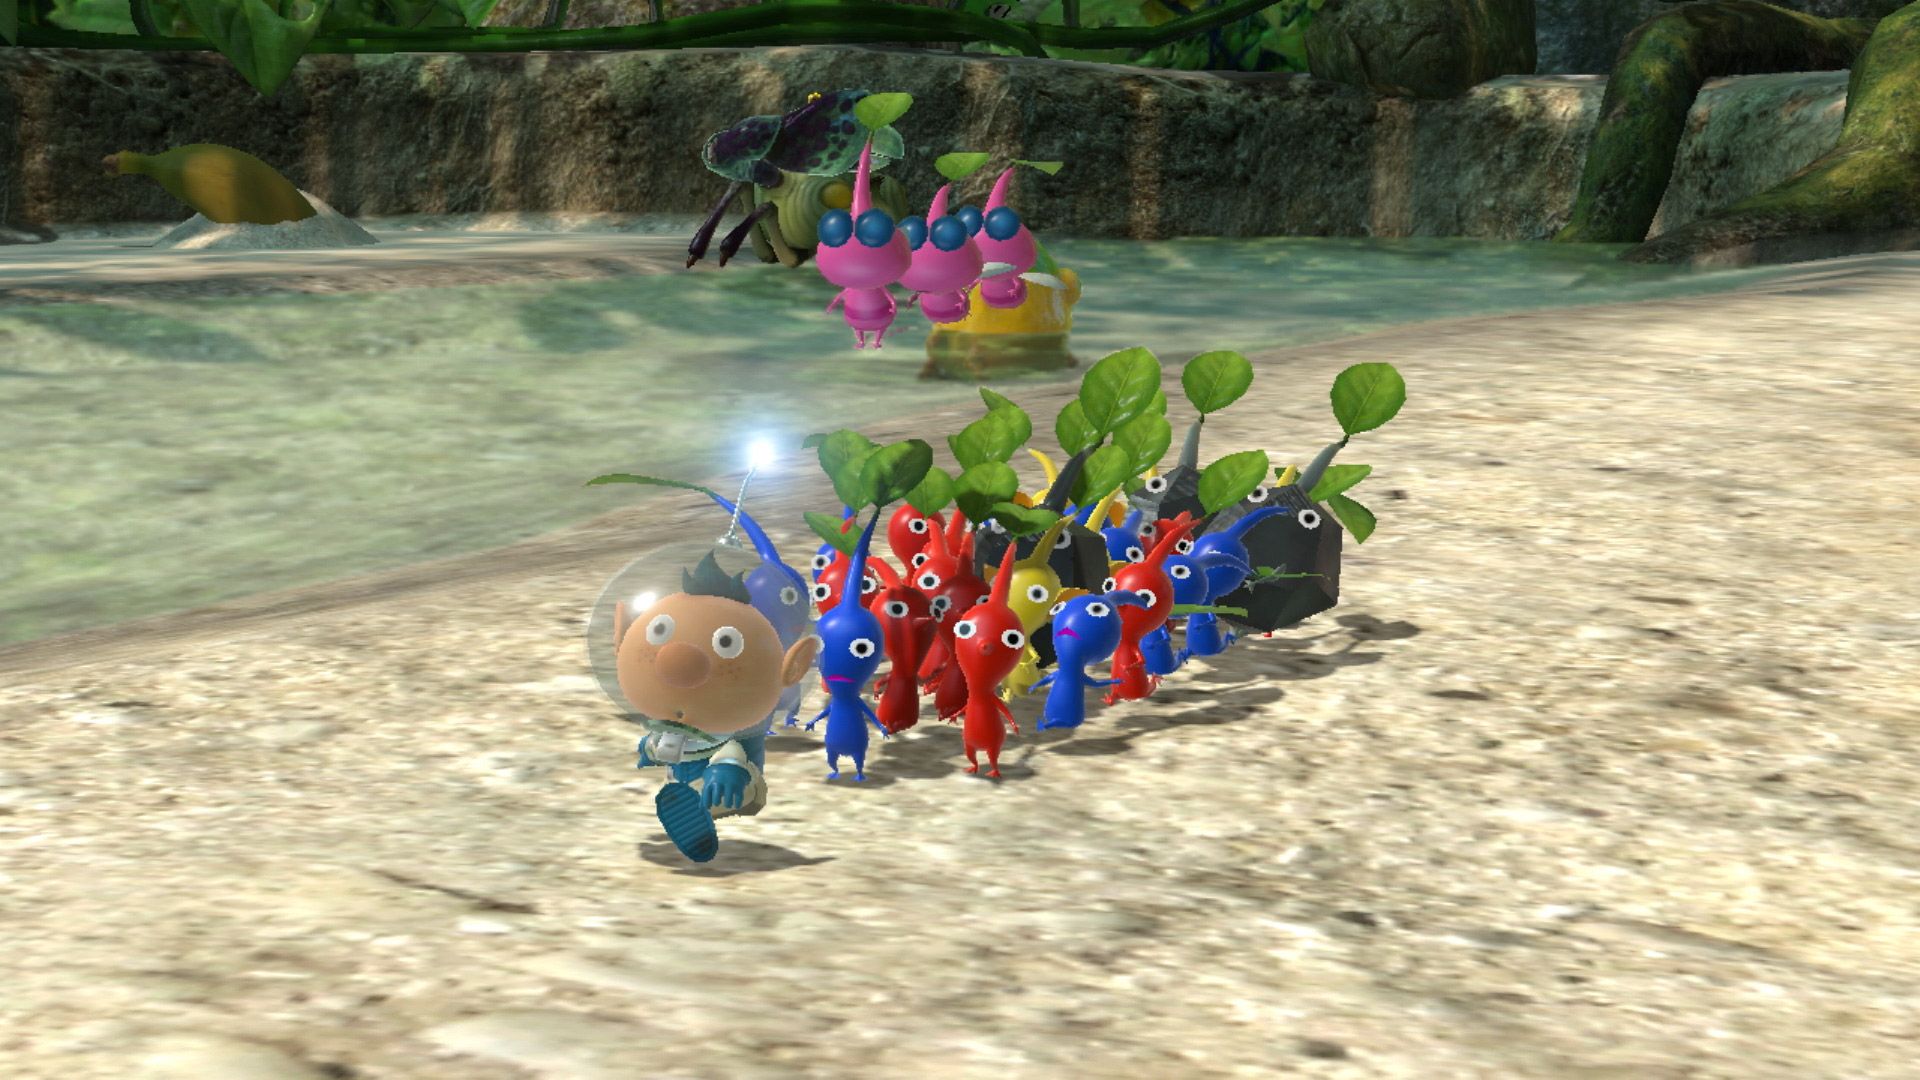 Pikmin 3 Deluxe revives the modern classic for the Switch